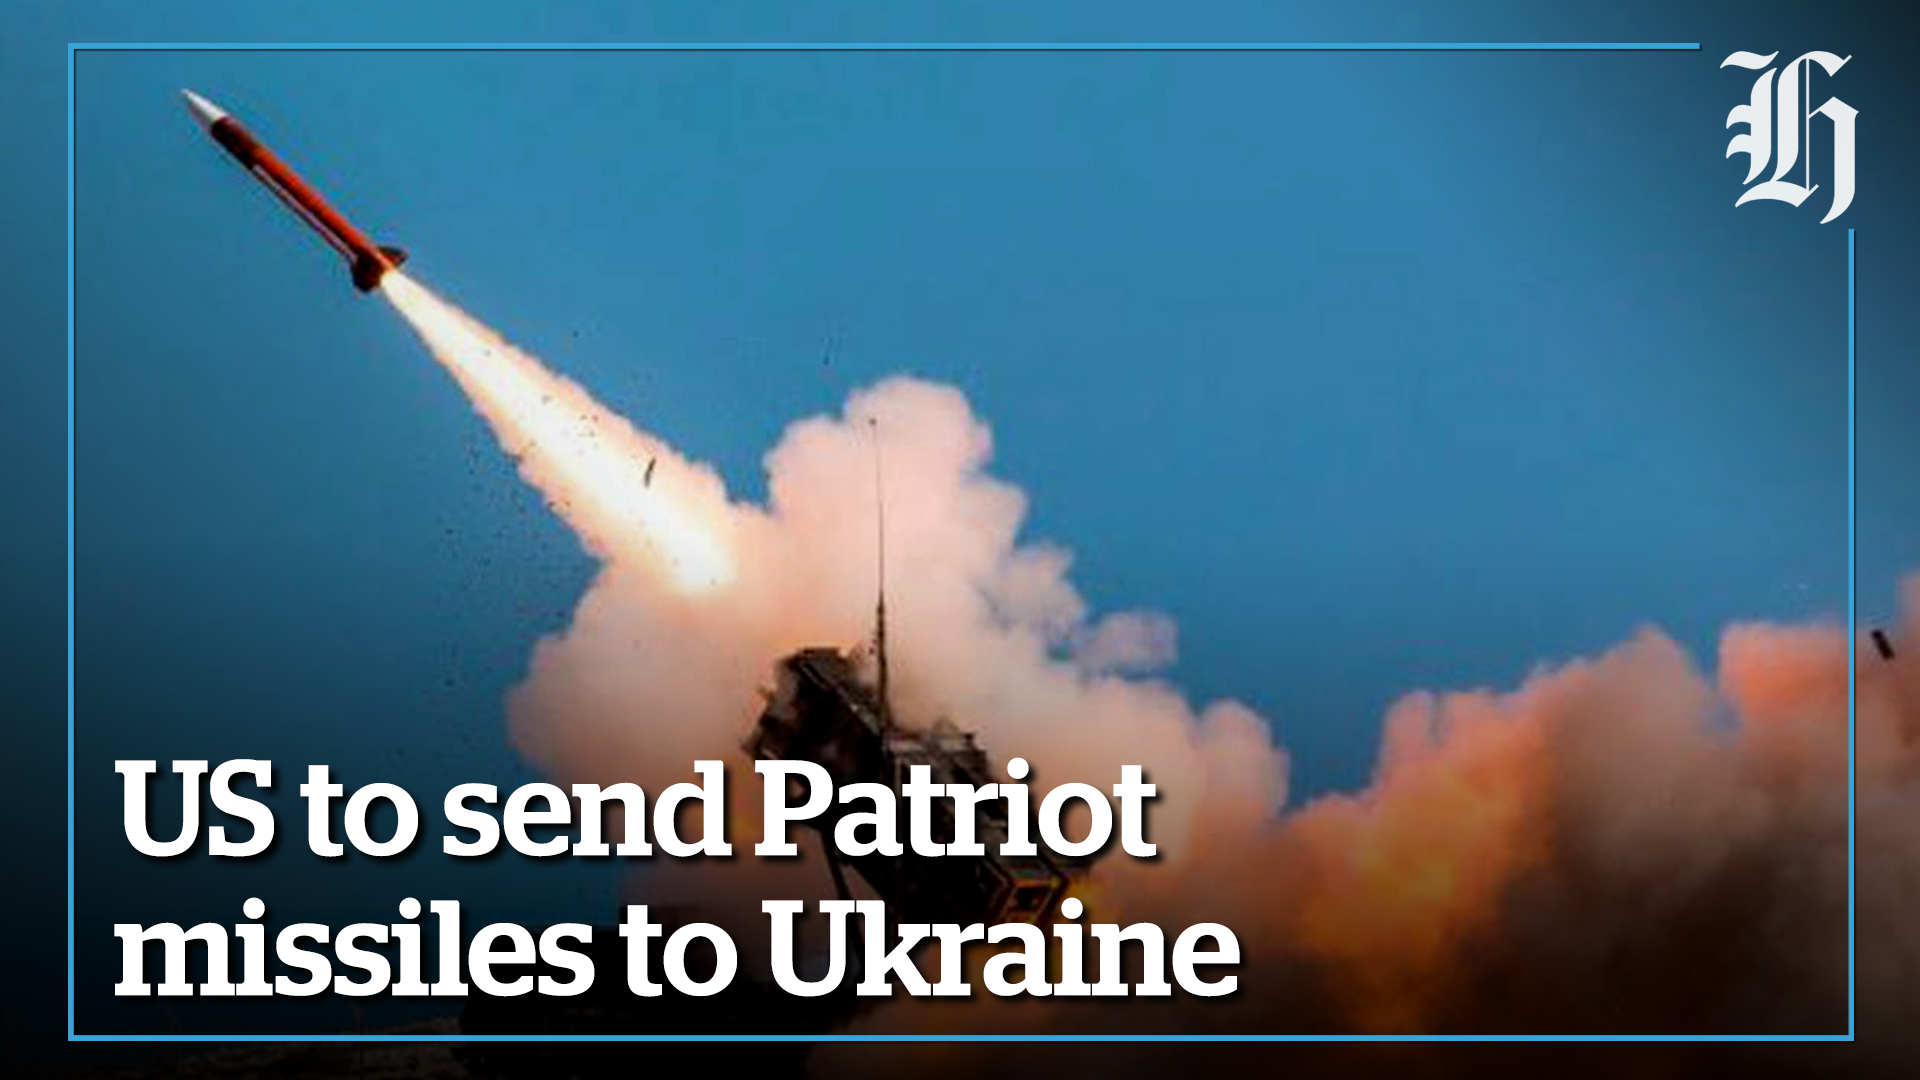 Russia-Ukraine war: Explainer - What can the Patriot missile do for Ukraine? - NZ Herald